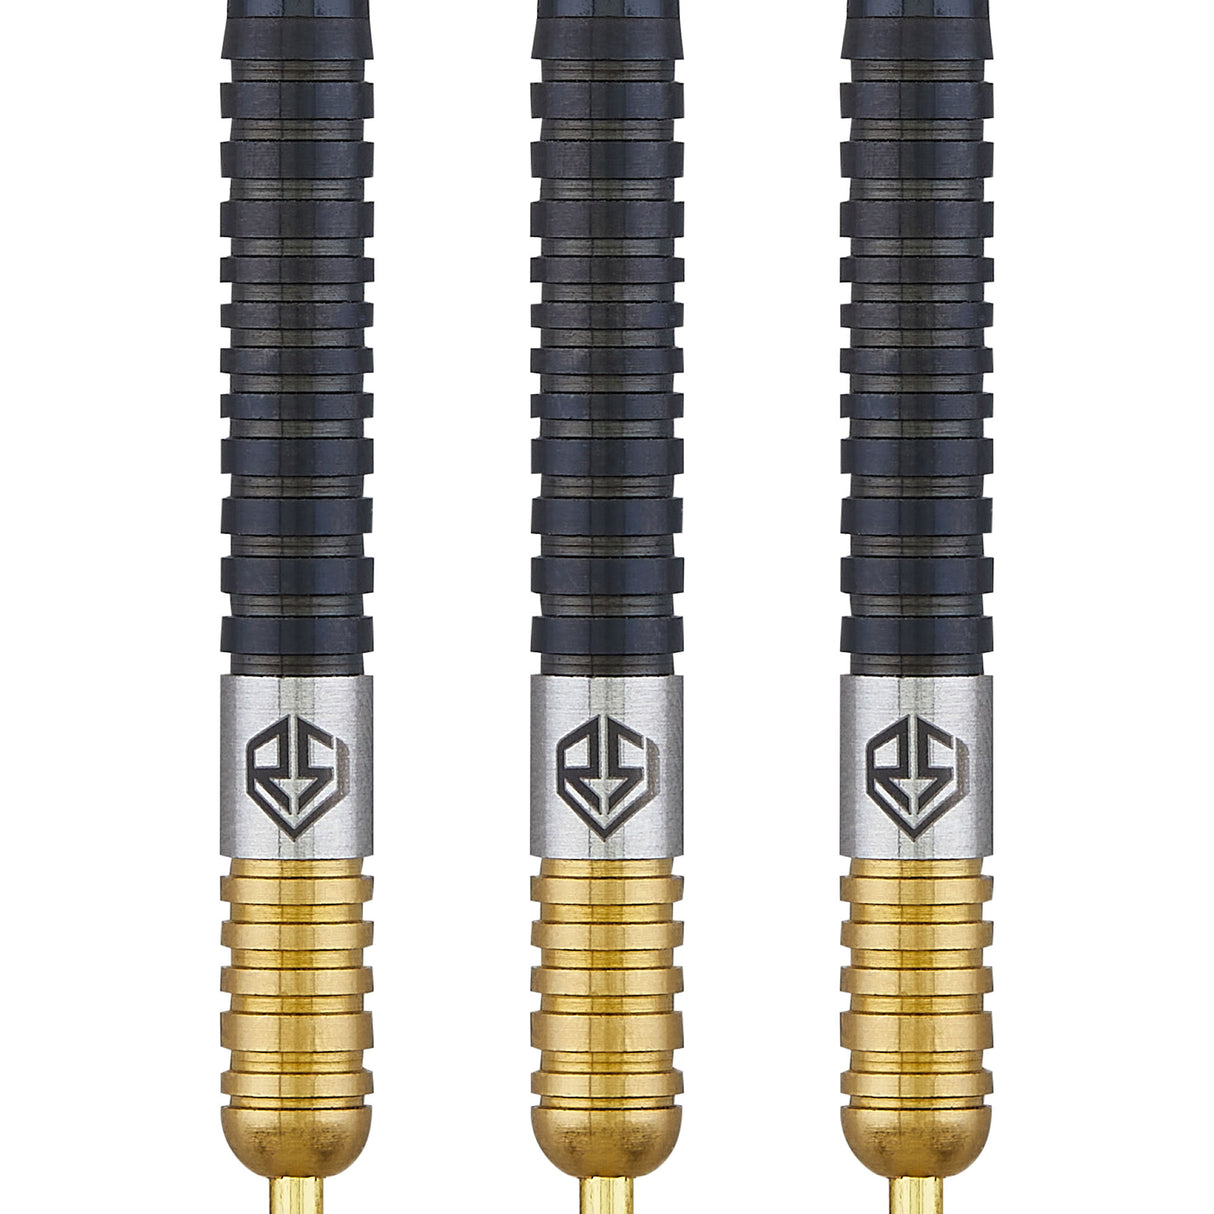 Unicorn Ross Smith Darts - Steel Tip - Smudger - Two Tone - Black & Gold